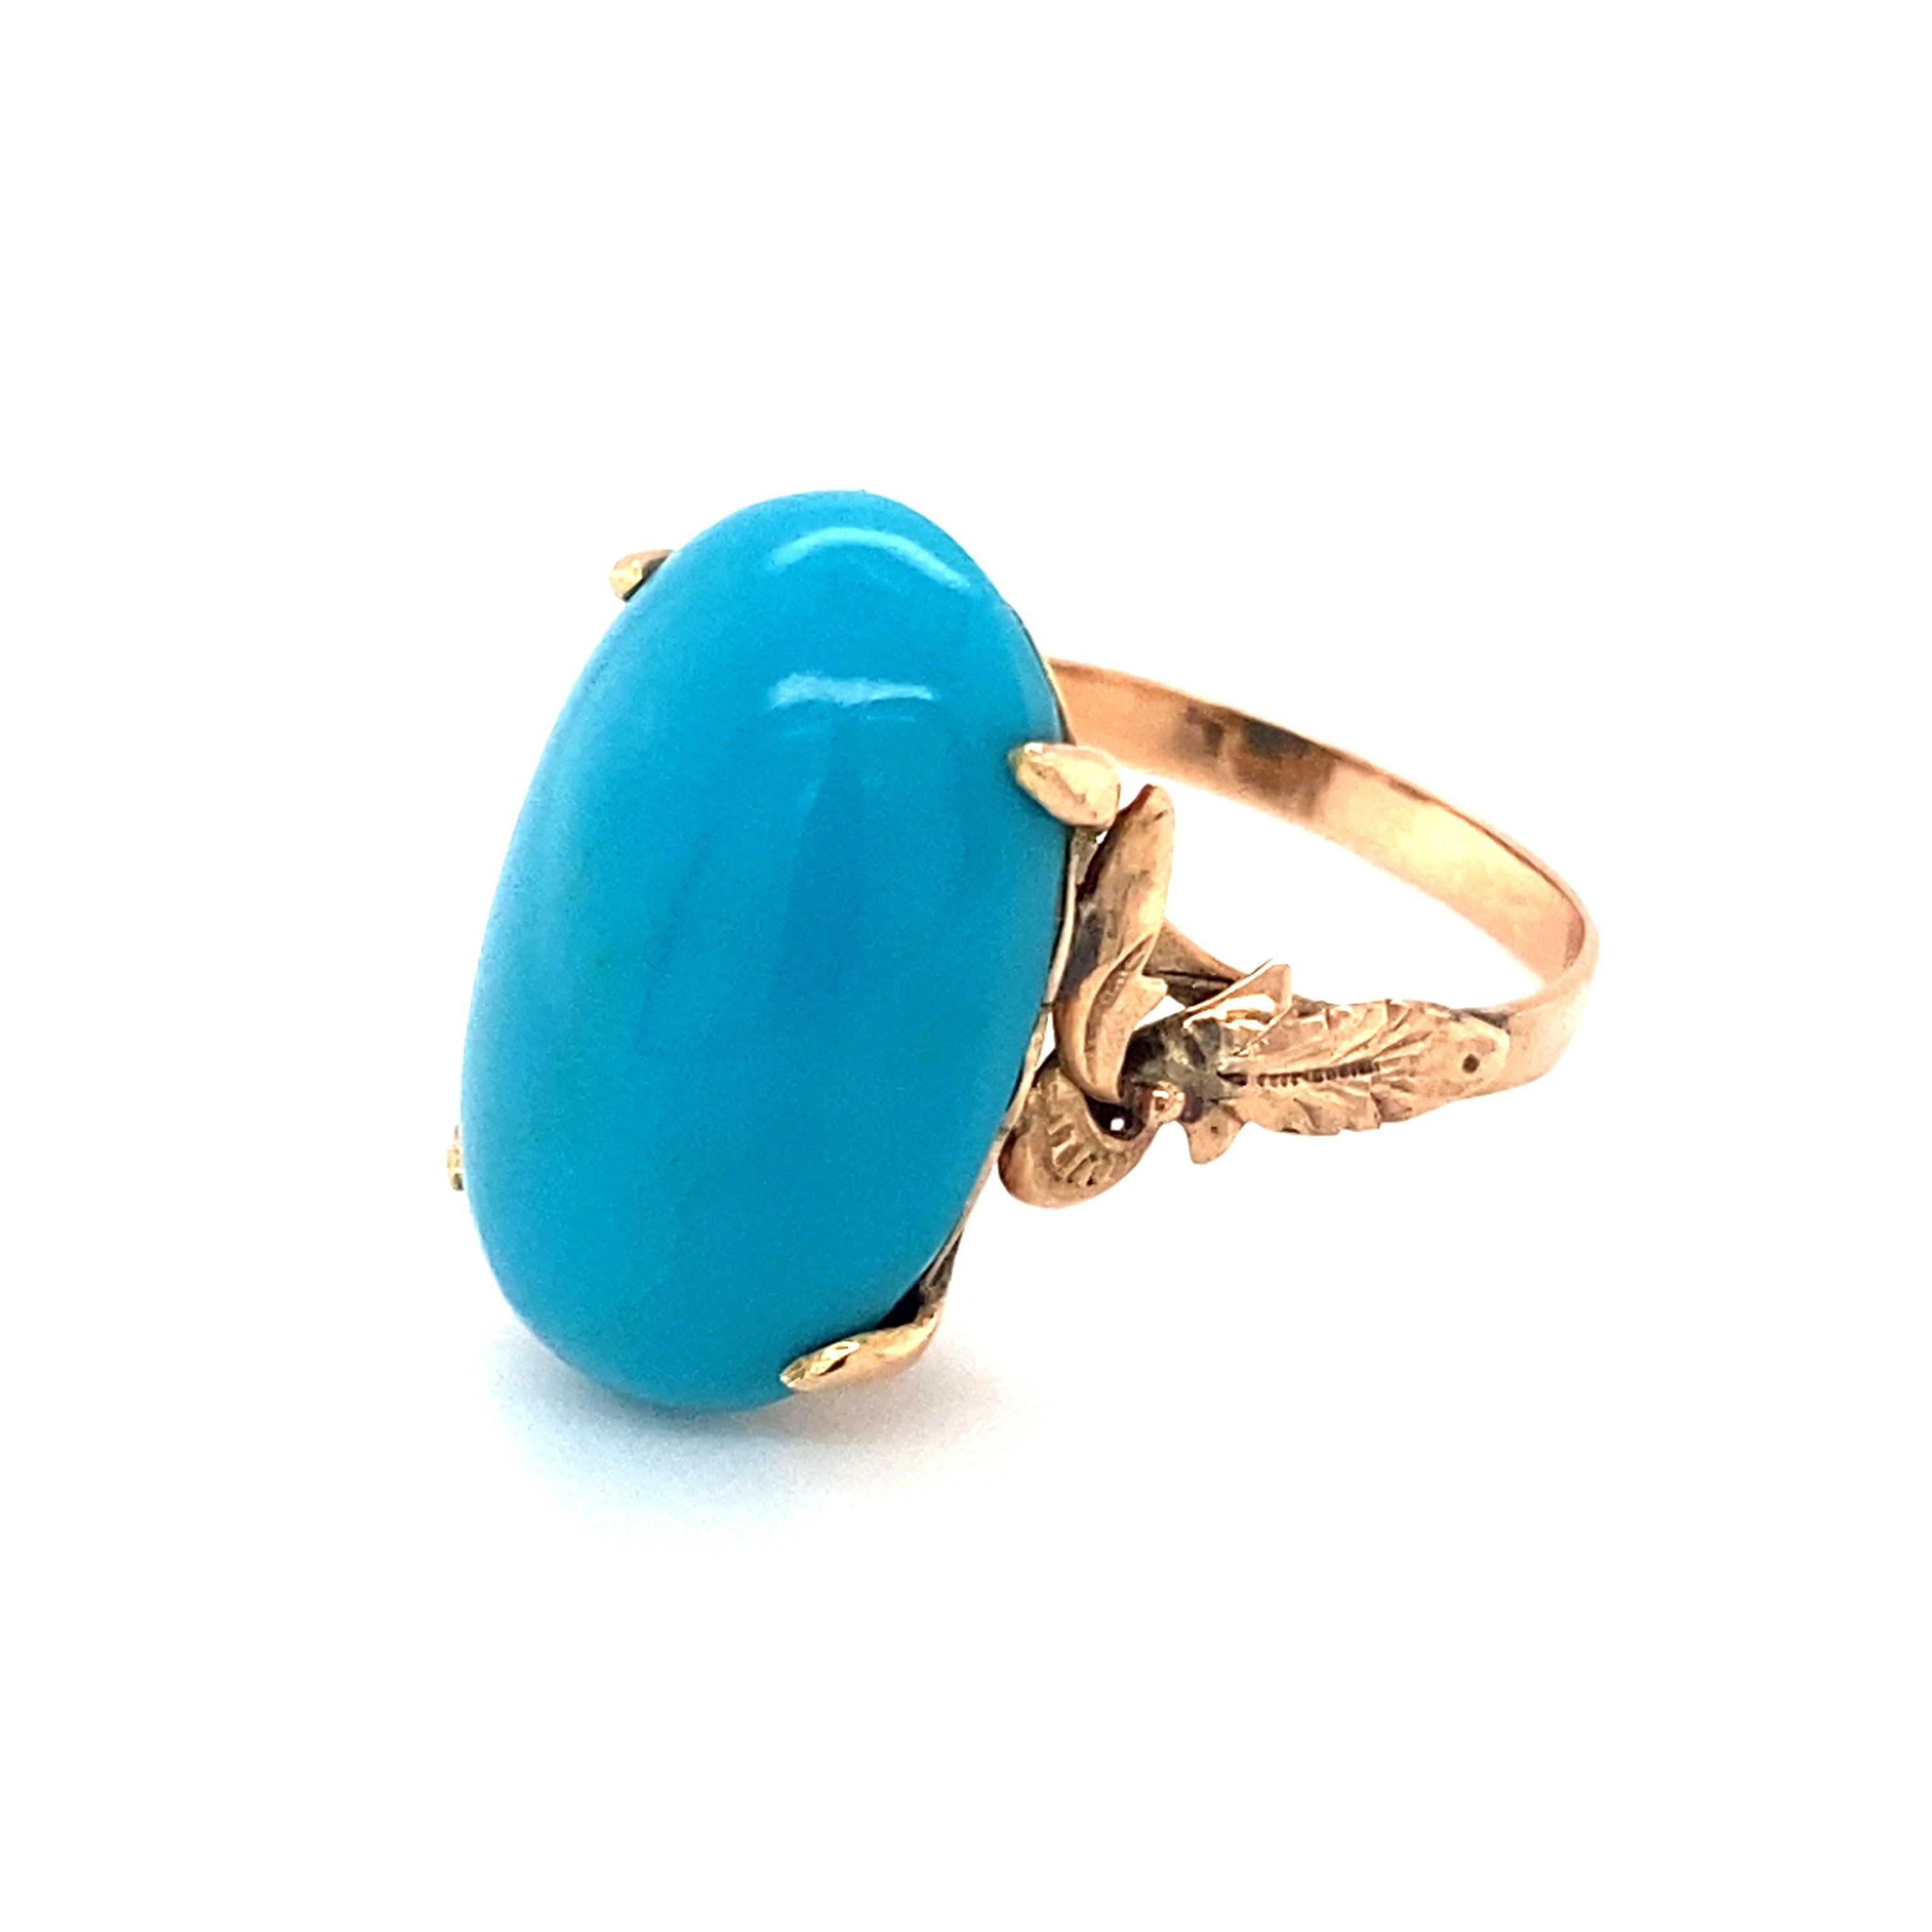 Item Details: 
Ring Size: 8.5, sizable
Metal Type: 9 Karat Rose Gold
Weight: 4.8 grams
Finger to Top of Stone Measurement: 10 millimeters 

Color Stone Details: 
Type: Natural Turquoise
Color: Blue
Cut: Oval
Dimensions: 19.5 millimeters x 12